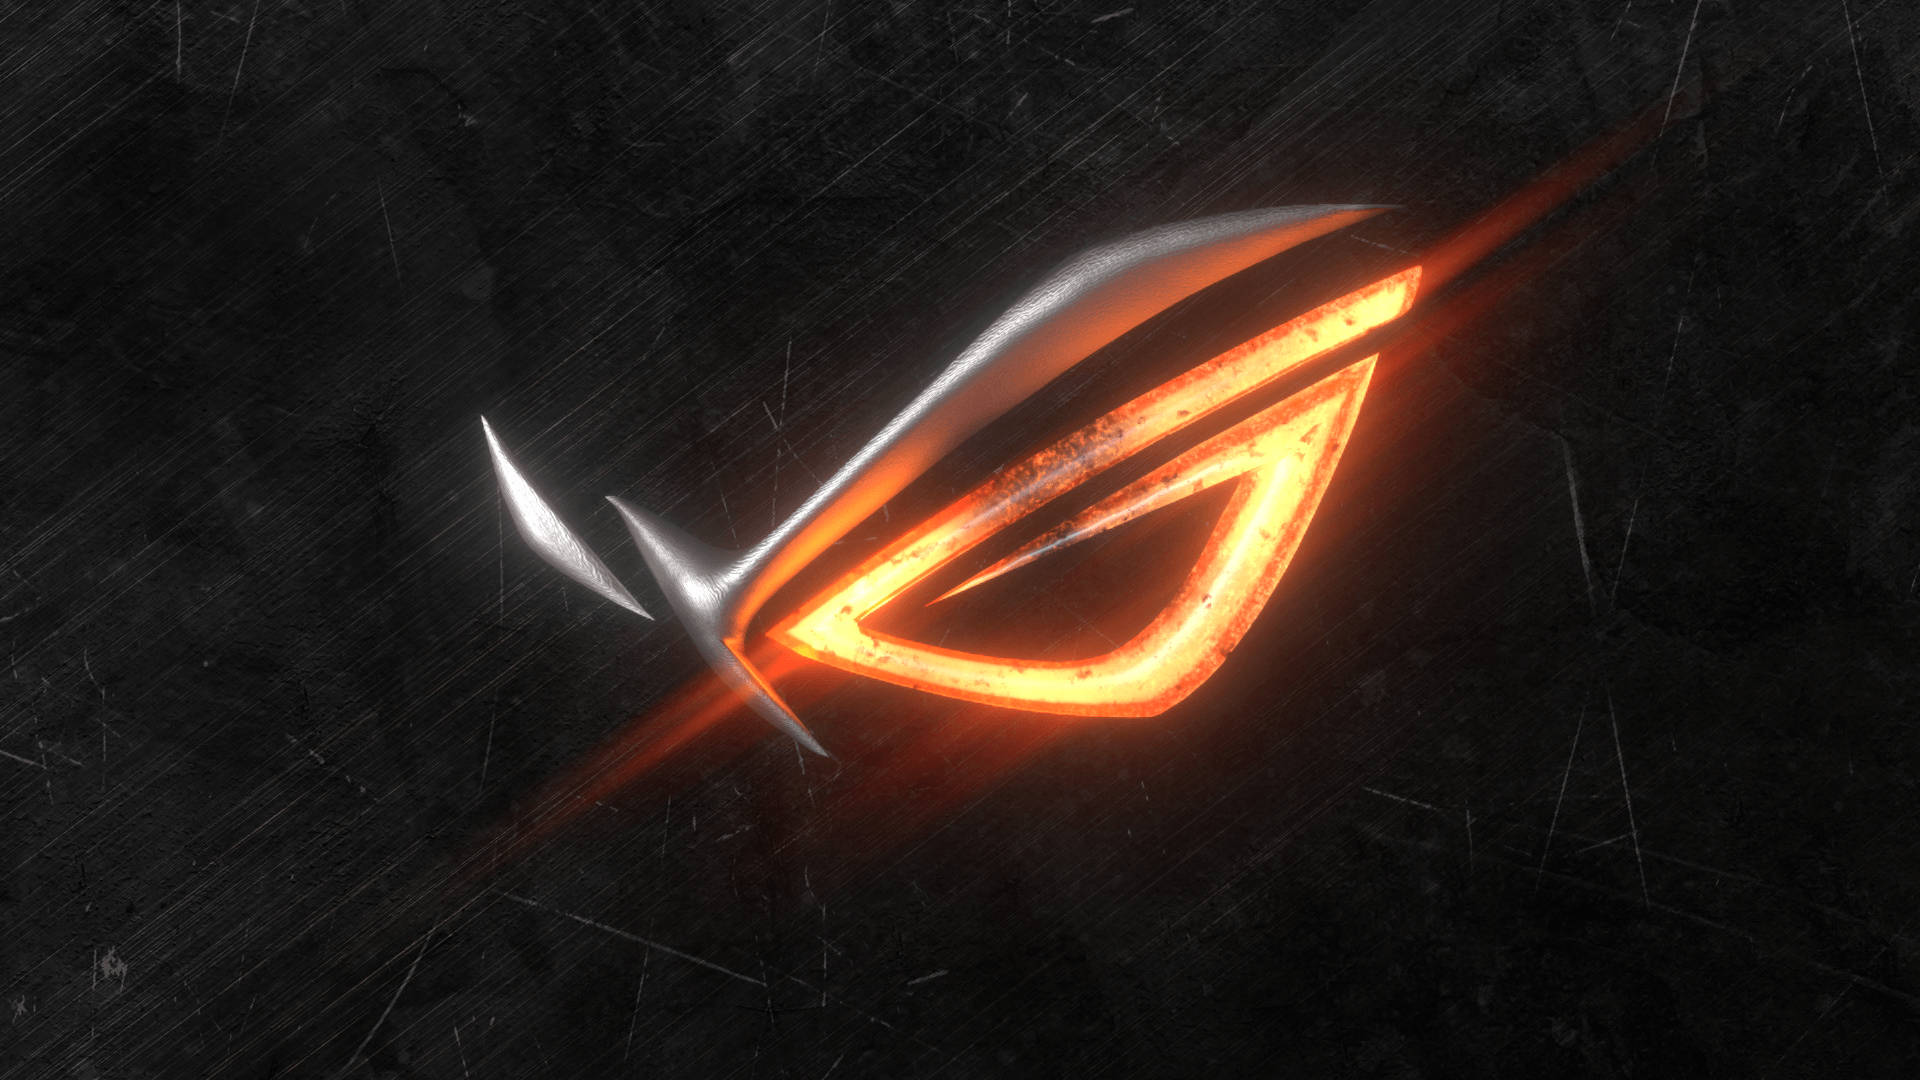 Light Up Your Workstation with Asus ROG Wallpaper